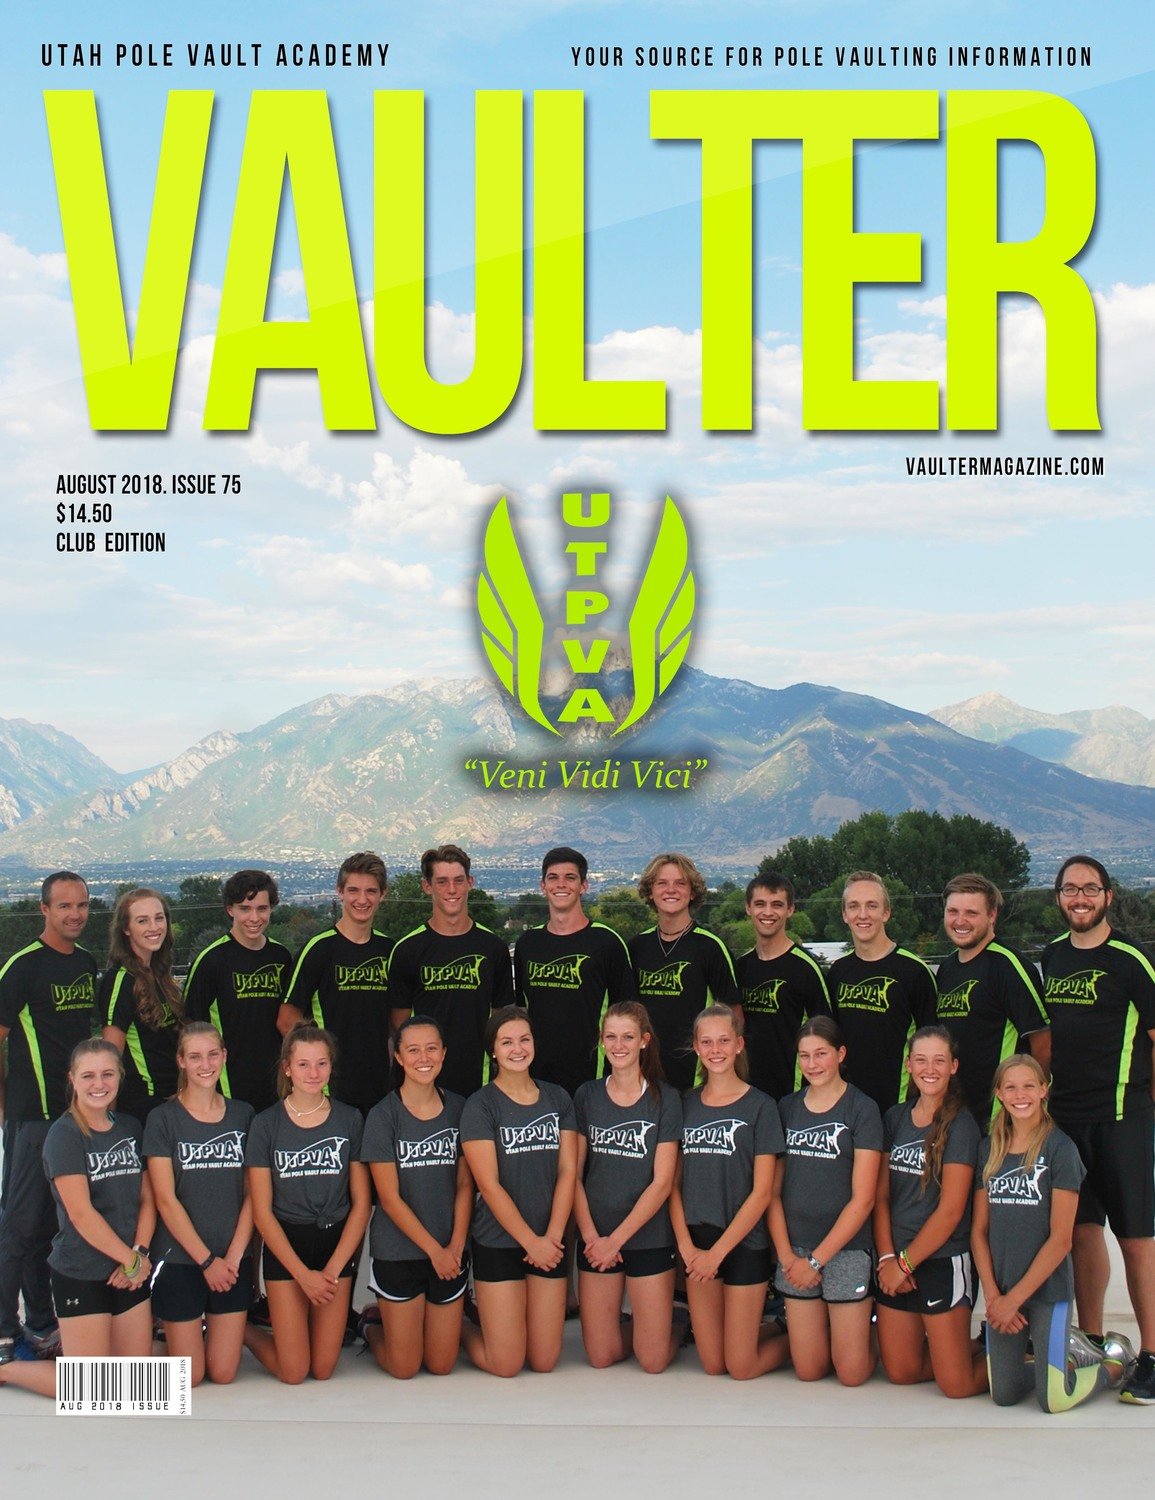 August 2018 Utah Pole Vault Academy Cover Poster for Vaulter Magazine